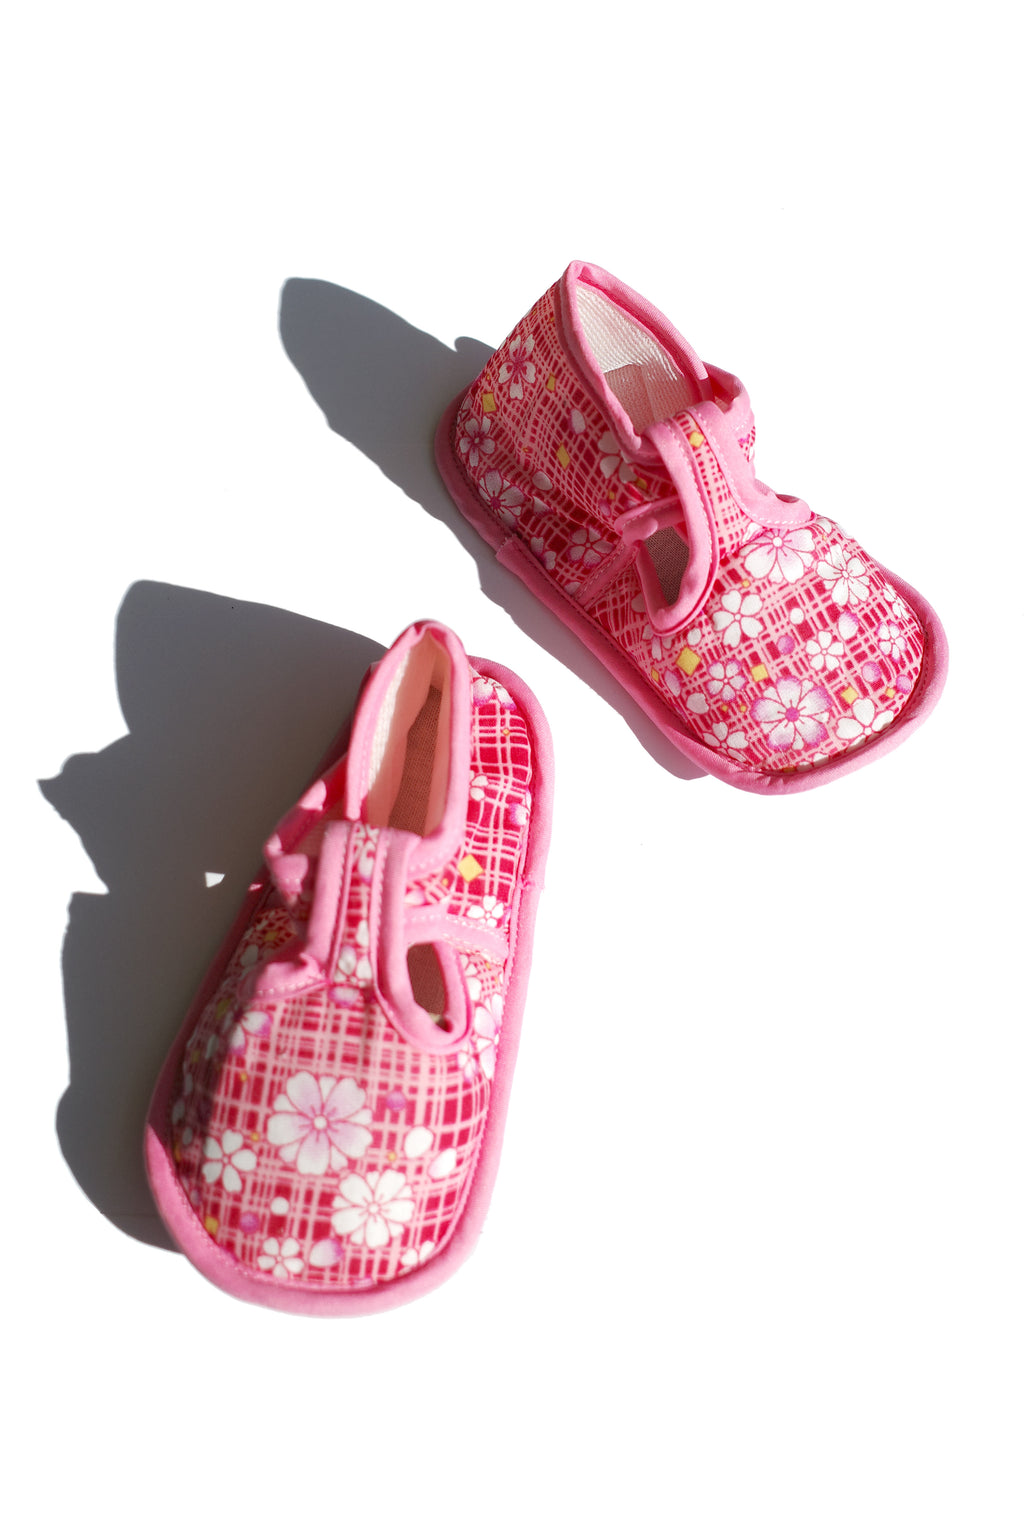 baby shoes - cherry blossom